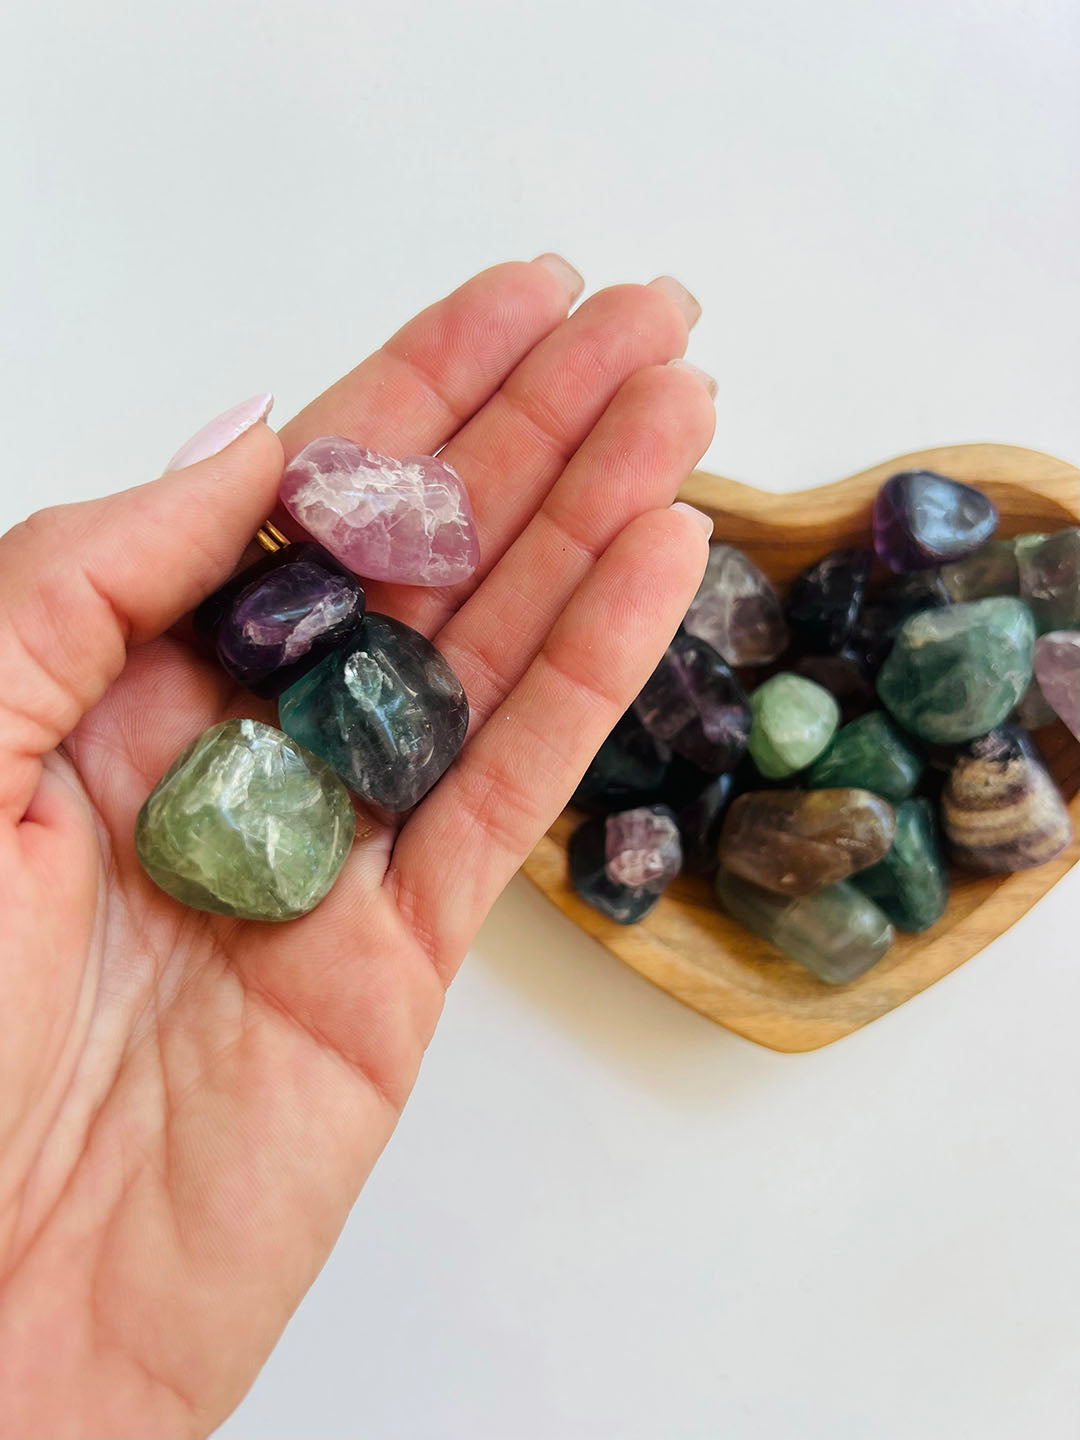 Fluorite Tumble - Discernment/Learning/Concentration